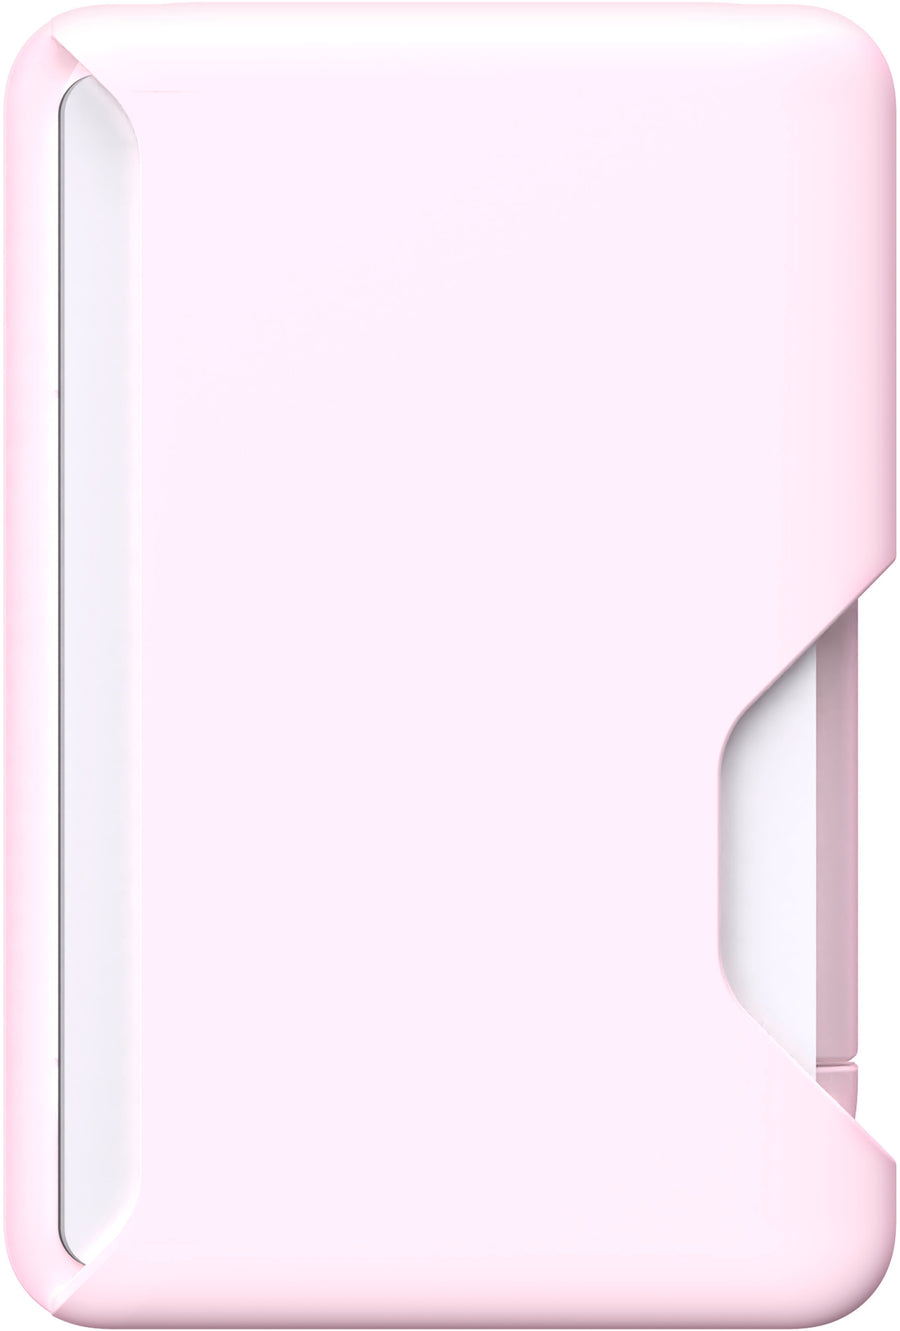 Speck - ClickLock Wallet for Apple iPhones with MagSafe - Nimbus Pink_0